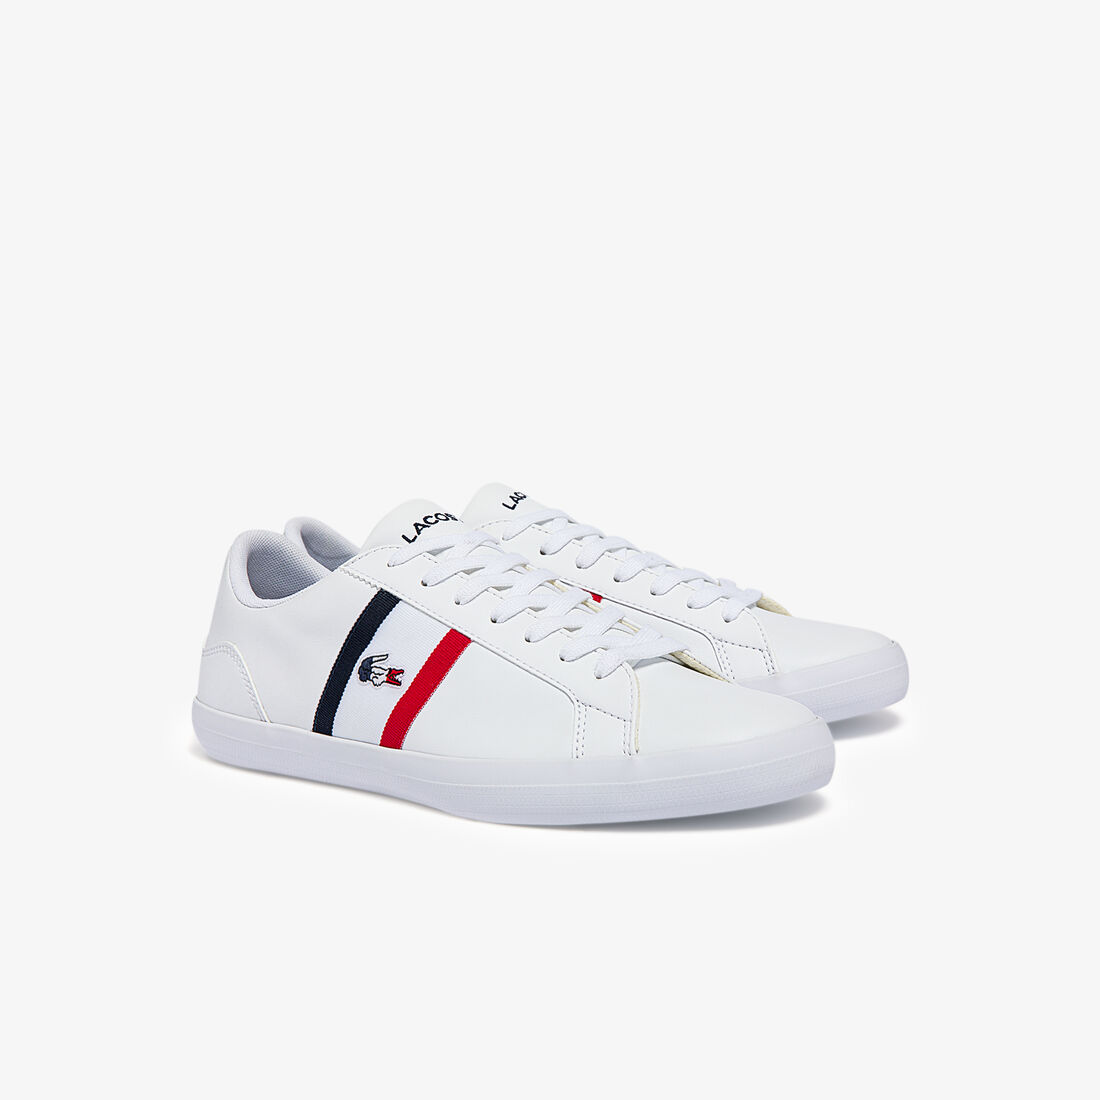 Lacoste Lerond Tricolore Leder And Synthetik Sneakers Herren Weiß Navy Rot | QRFY-96357